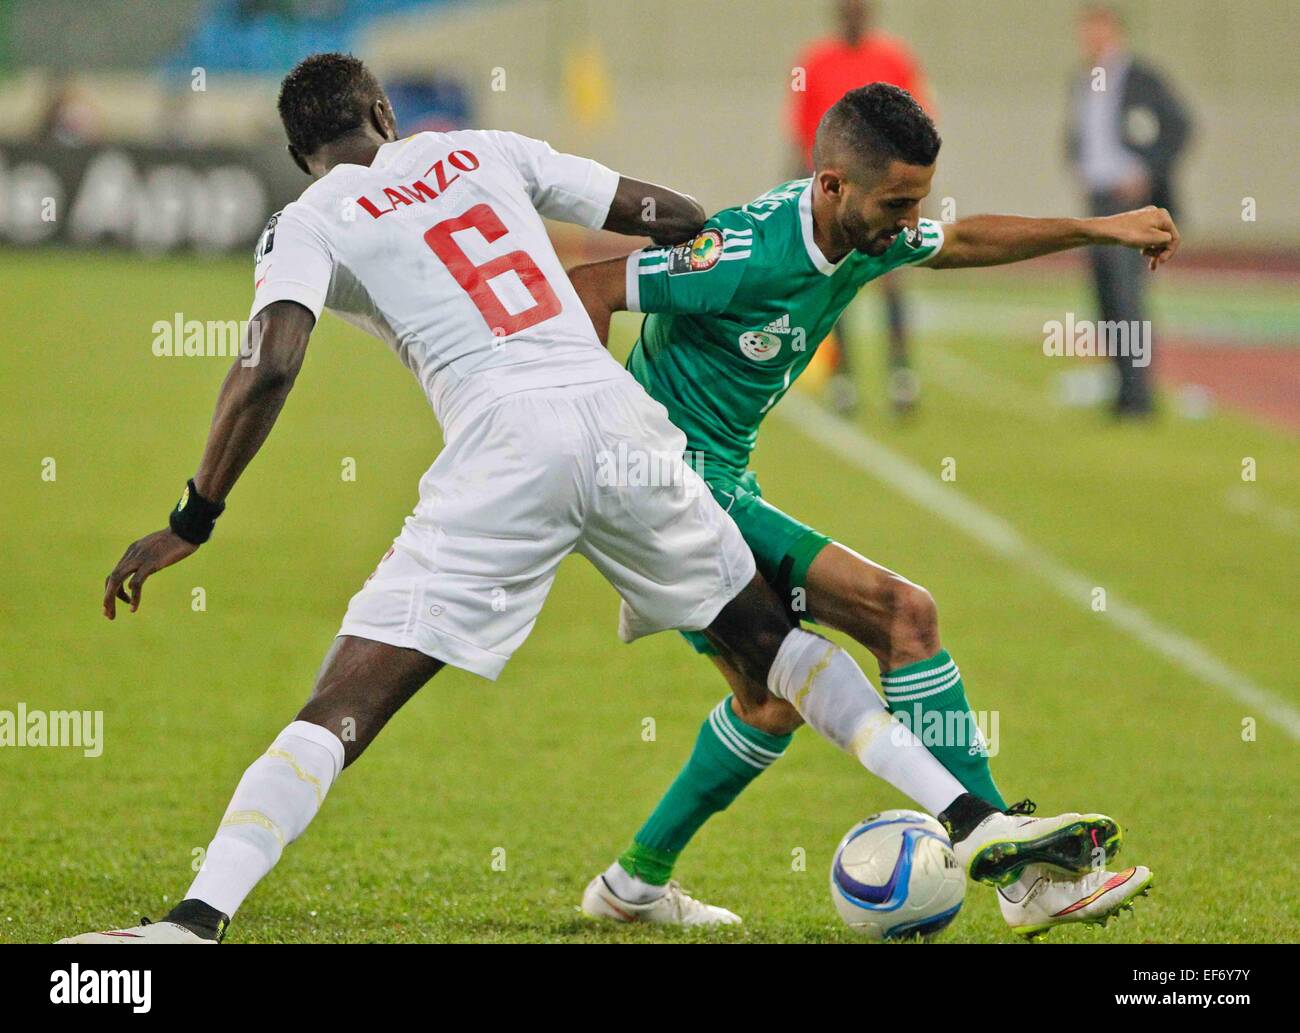 Malabo, Equatorial Guinea. 27th Jan, 2015. Riyad Karim Mahrez of Algeria competes during the group match of Africa Cup of Nations against Senegal at the Stadium of Malabo, Equatorial Guinea, Jan. 27, 2015. Algeria won 2-0. Credit:  Li Jing/Xinhua/Alamy Live News Stock Photo